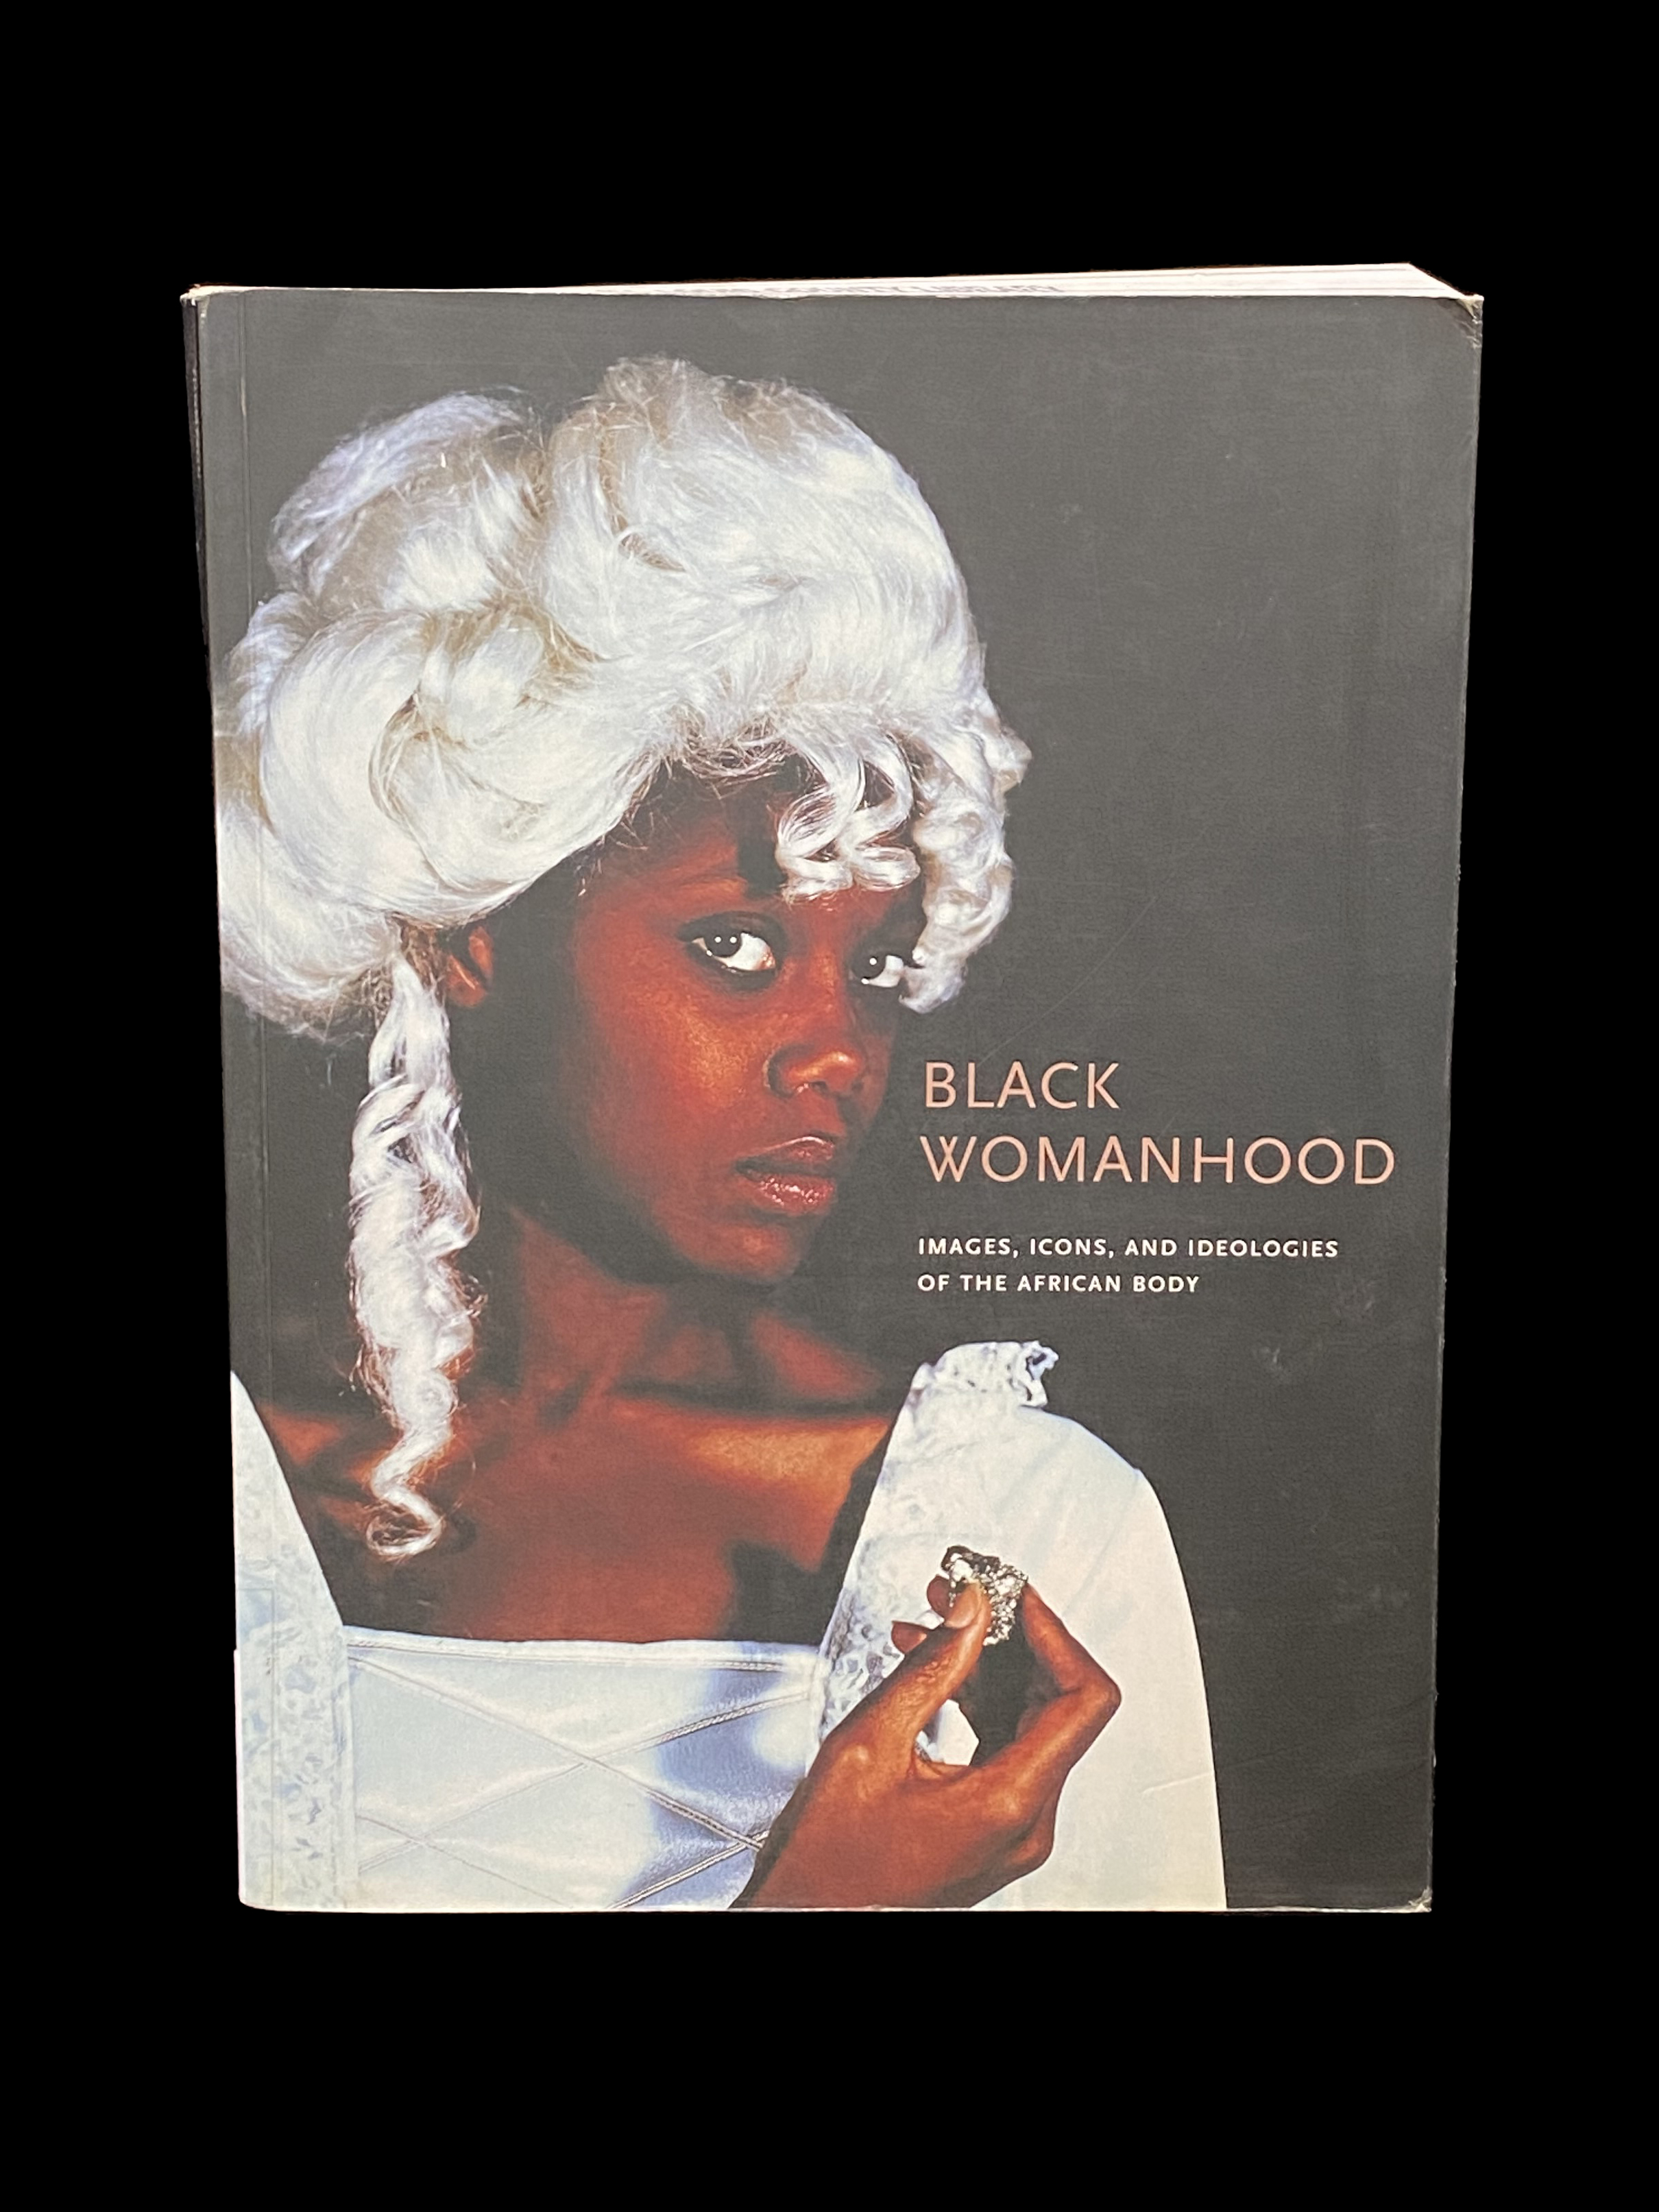 Black womanhood - Images, Icons, and Ideologies of the African Body - by Barbara Thompson